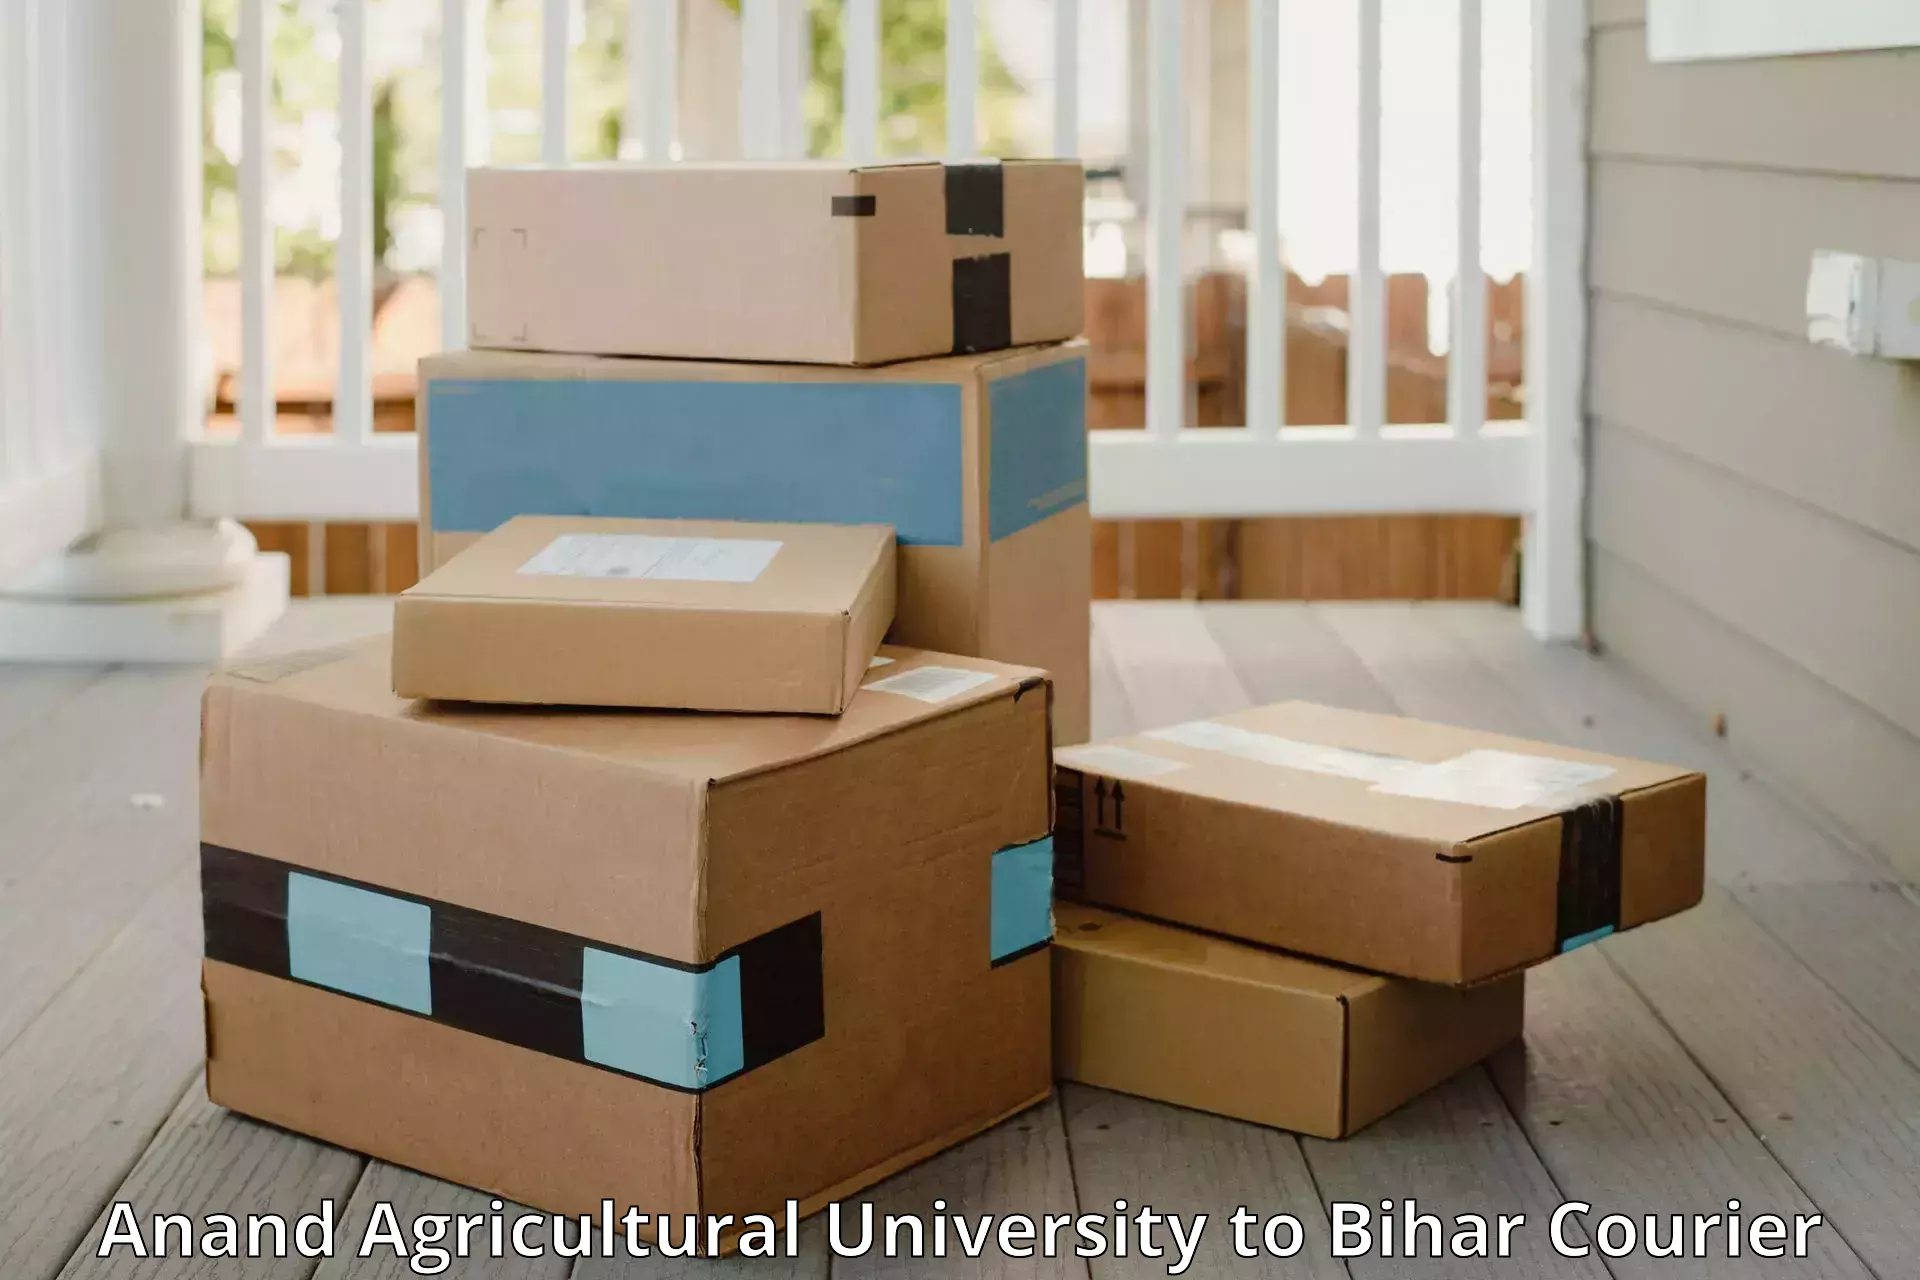 Baggage shipping service Anand Agricultural University to Bhagalpur